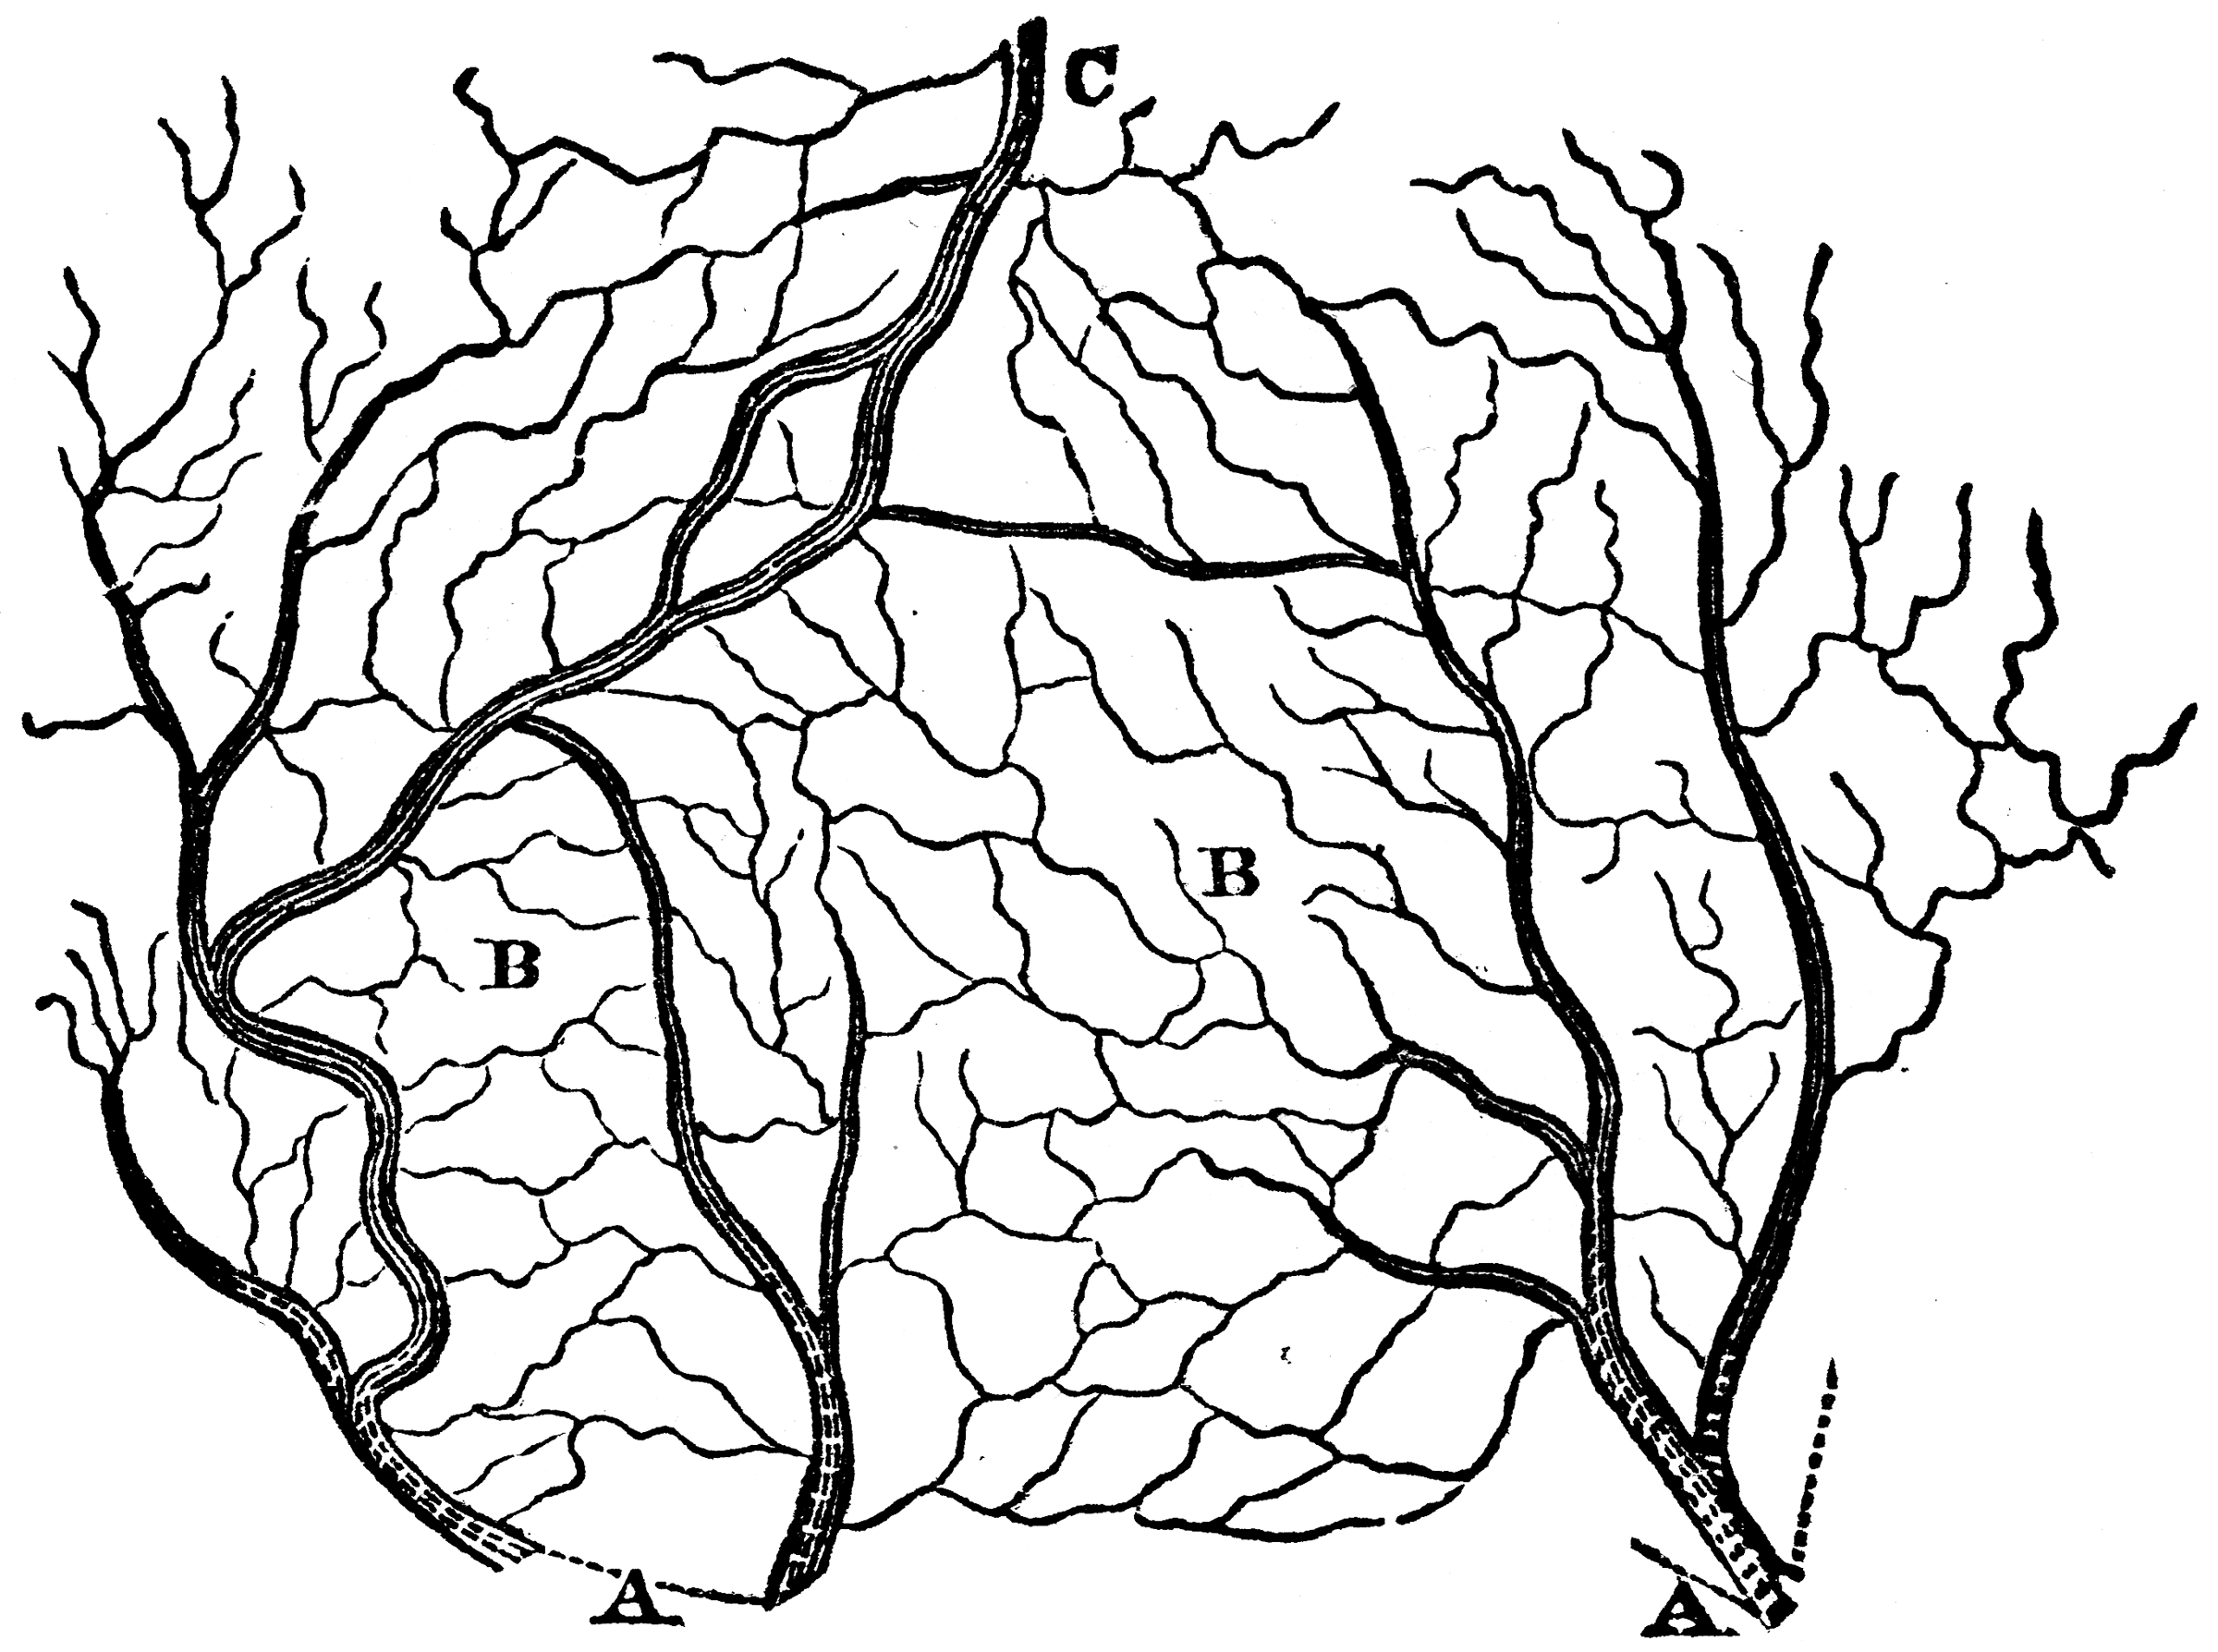 The Arteries and Veins of a Section of the Skin | ClipArt ETC